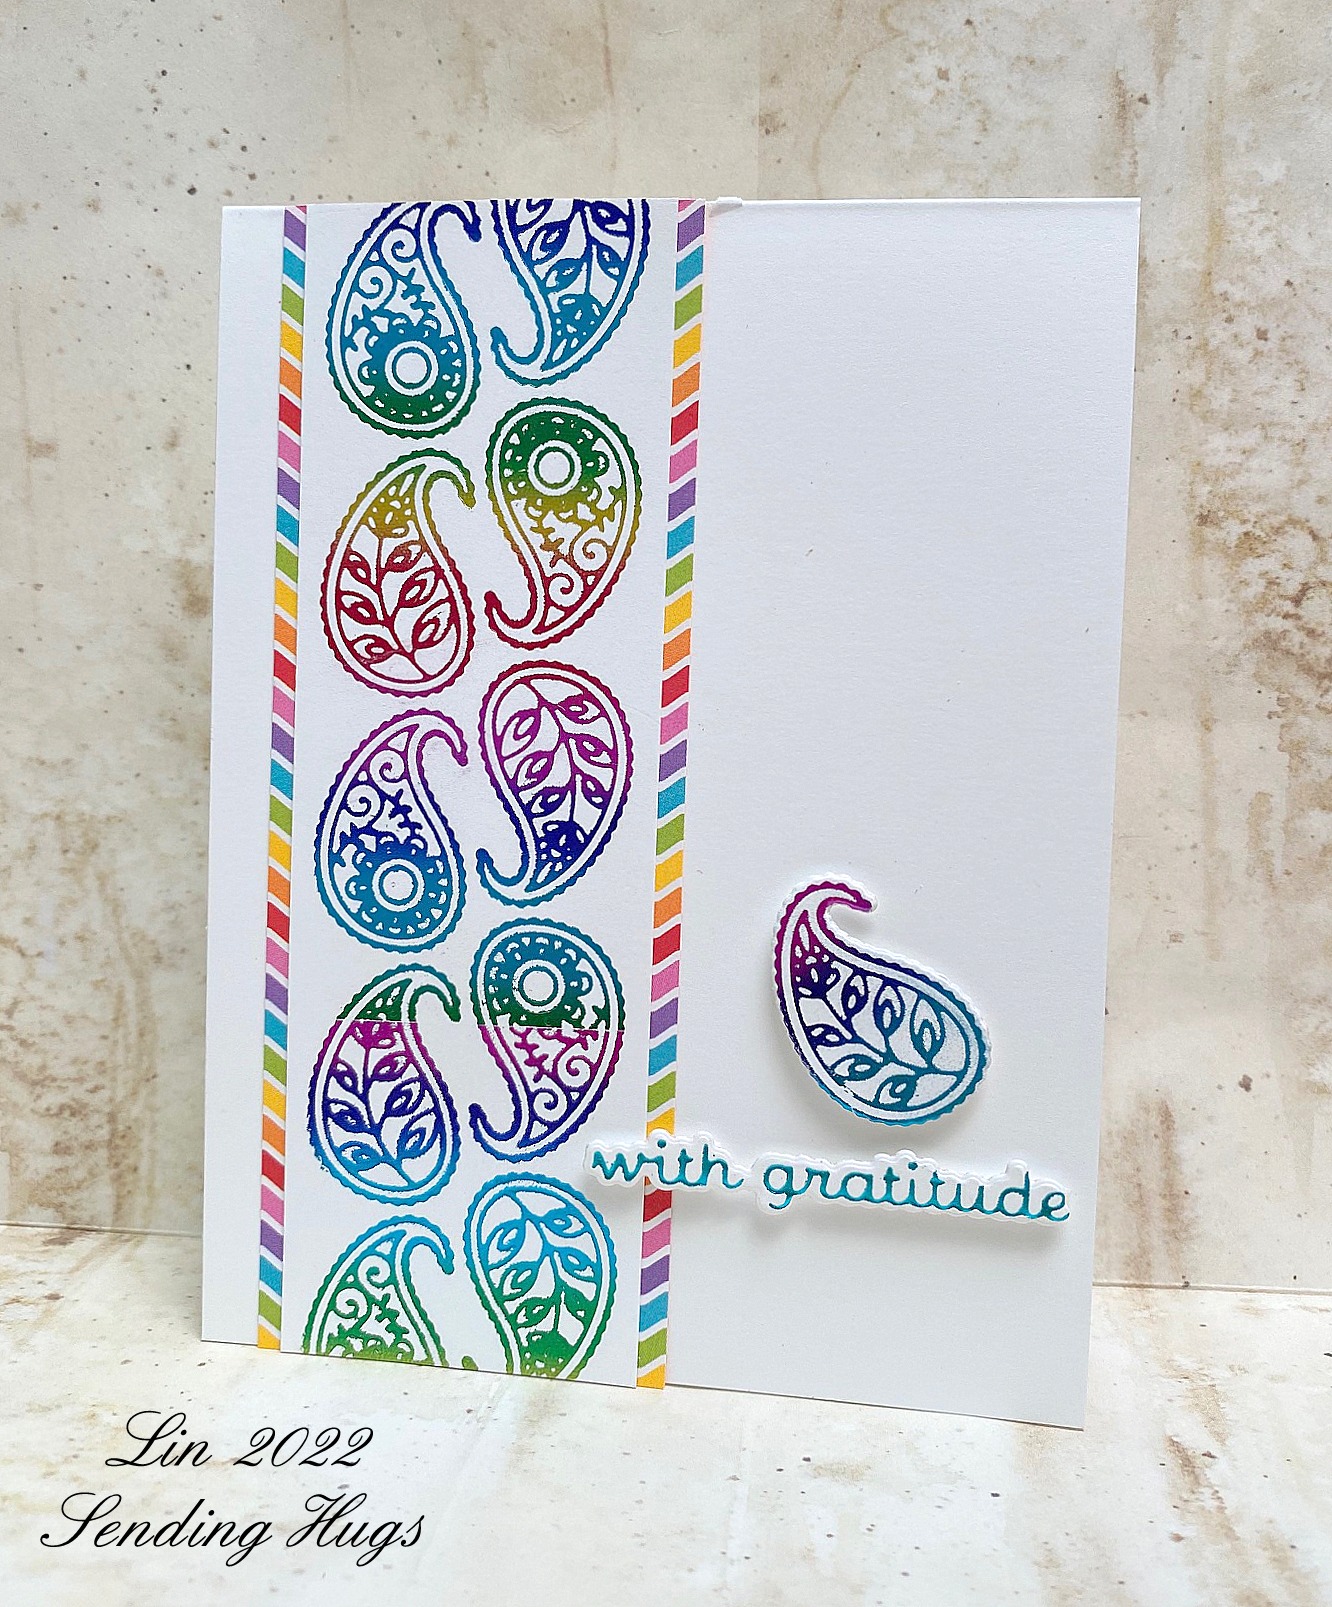 Spellbinders - Extended Cutting Plates - Teal , 2 Pack